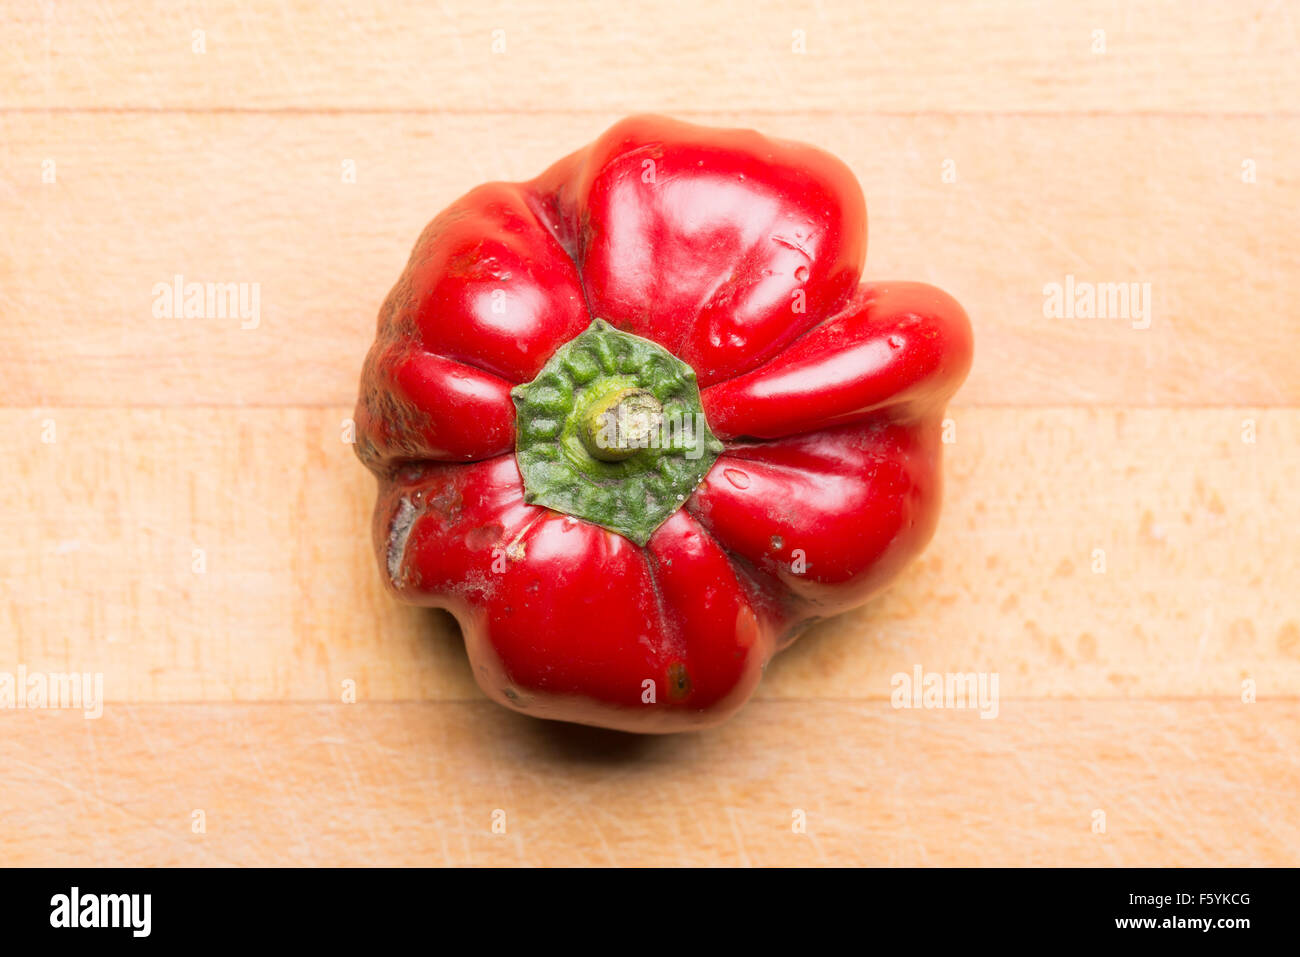 Natural red bell pepper from the garden Stock Photo